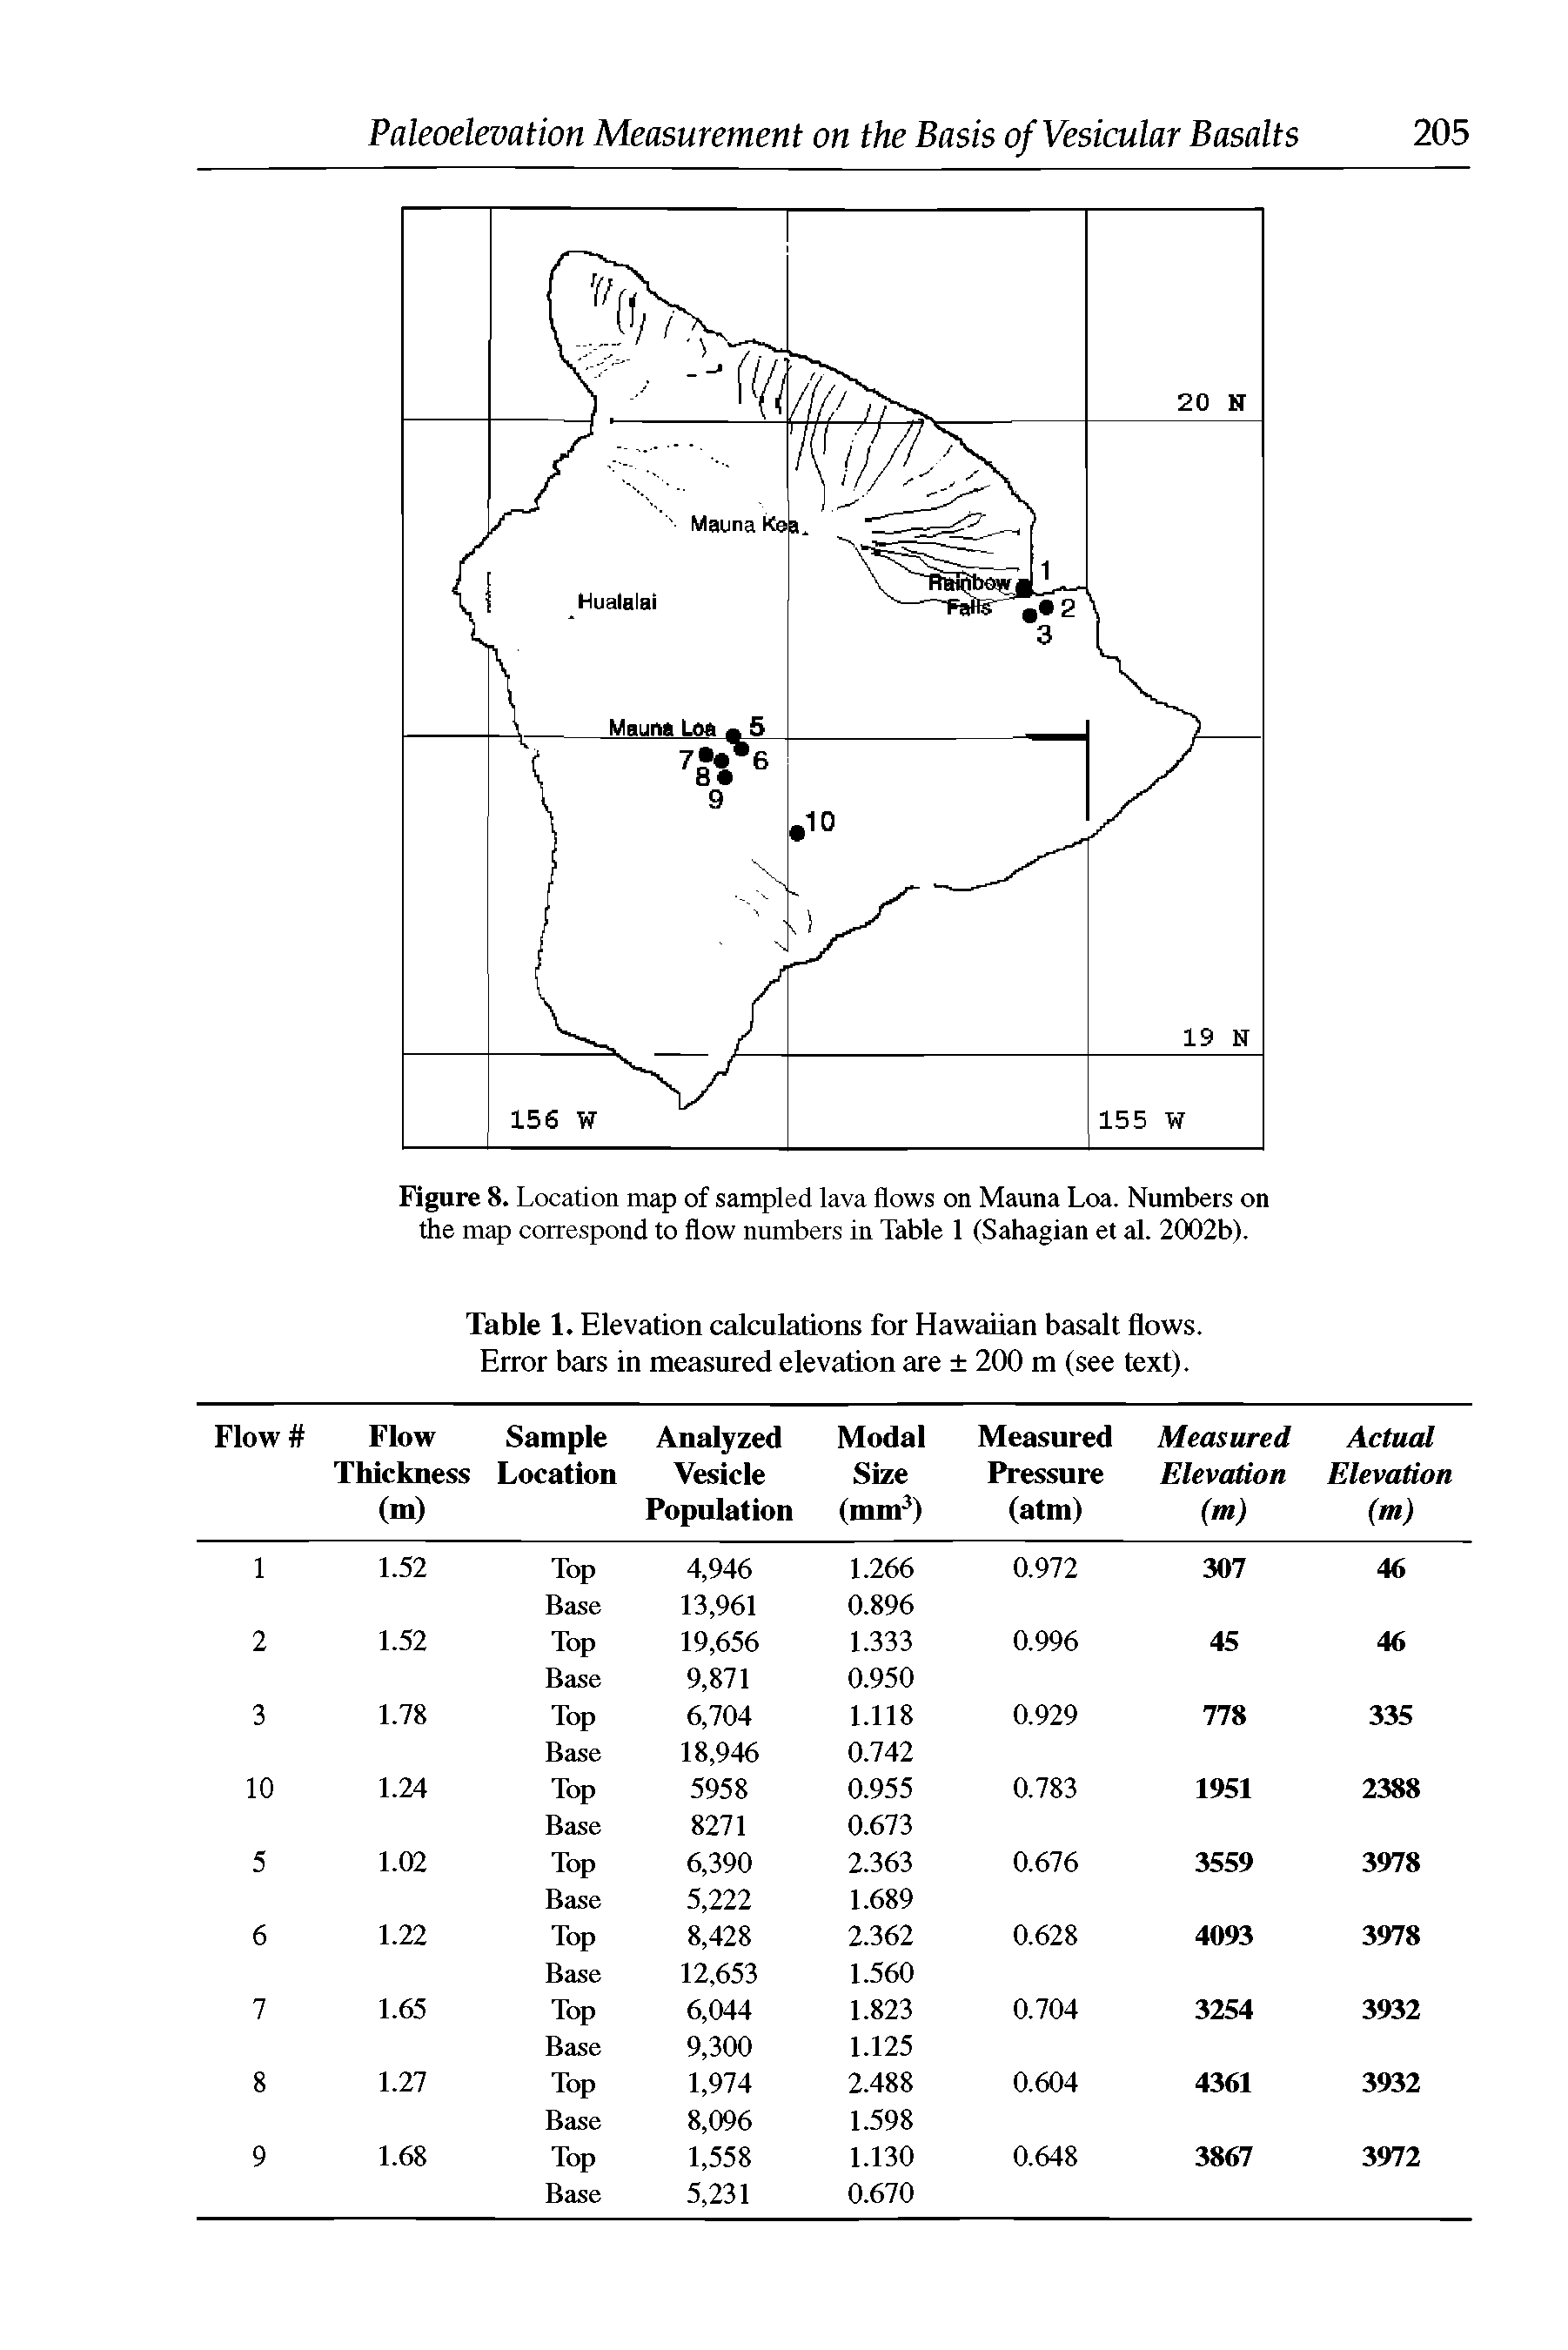 Table 1. Elevation calculations for Hawaiian basalt flows. Error bars in measured elevation are 200 m (see text).